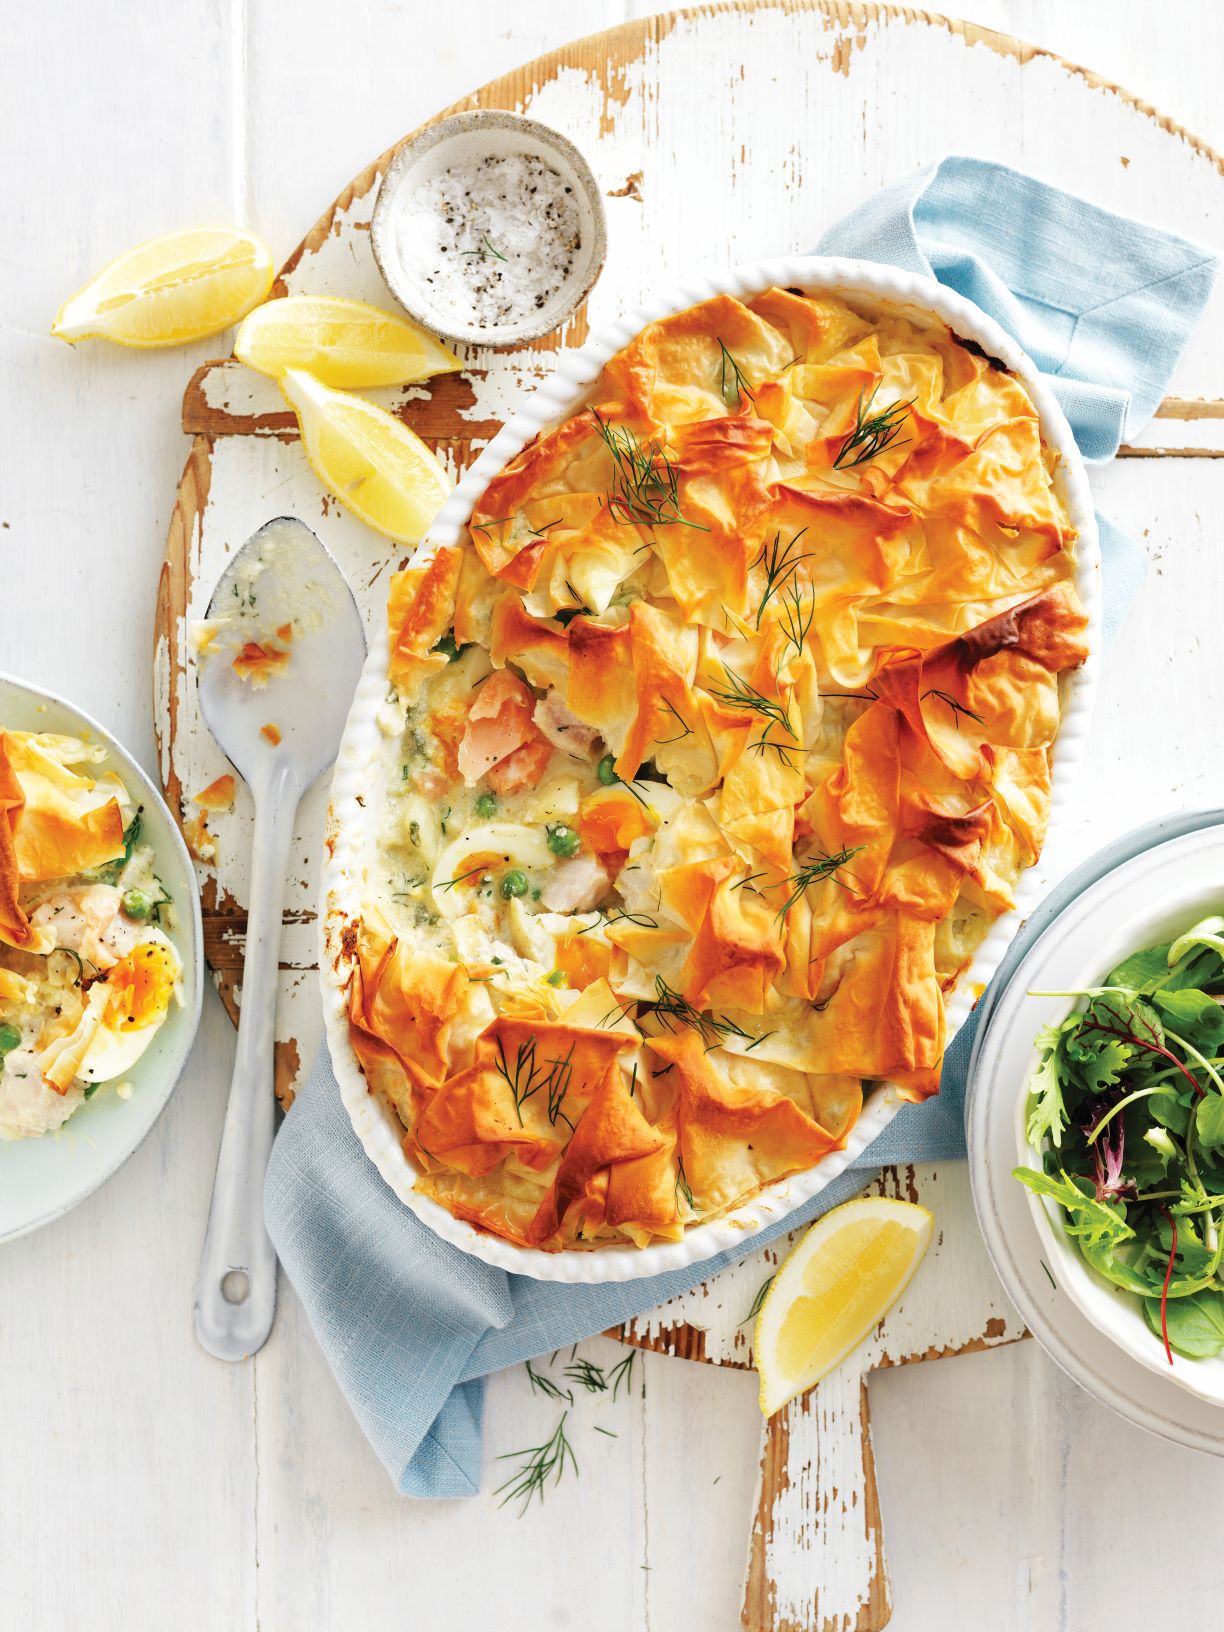 Salmon and white fish pie | Canberra Weekly